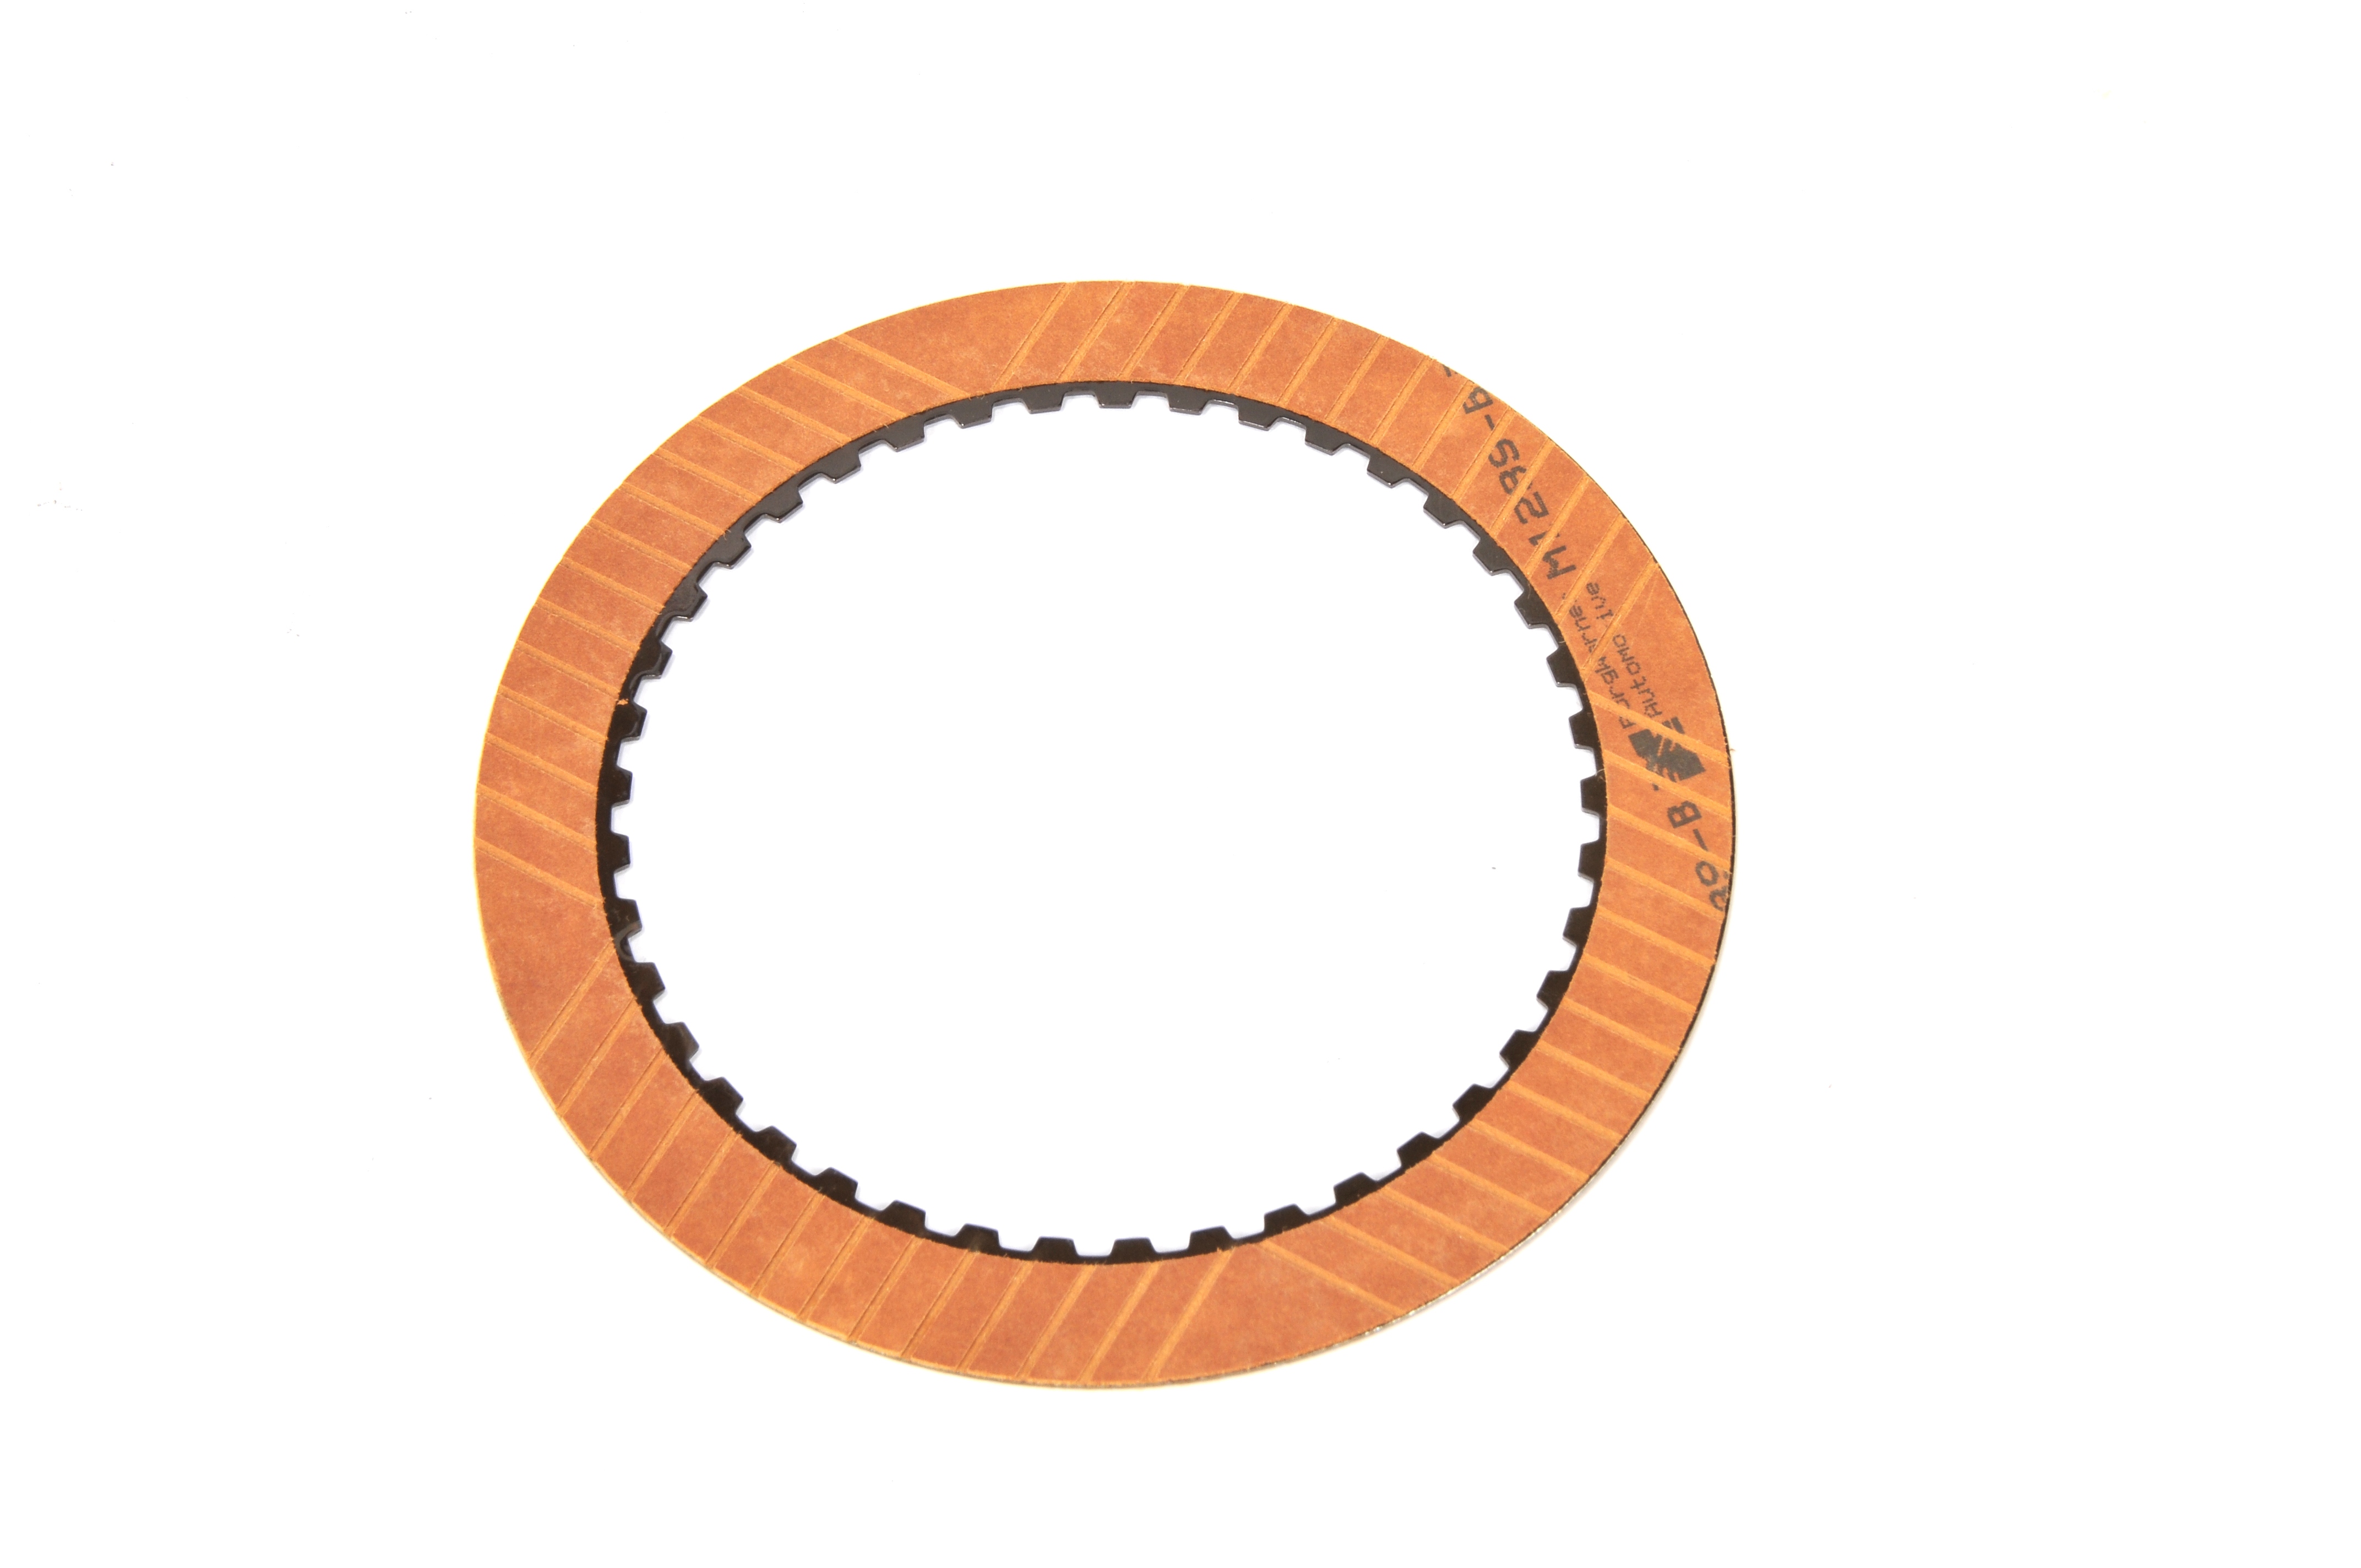 GM GENUINE PARTS - Transmission Clutch Friction Plate - GMP 24281022